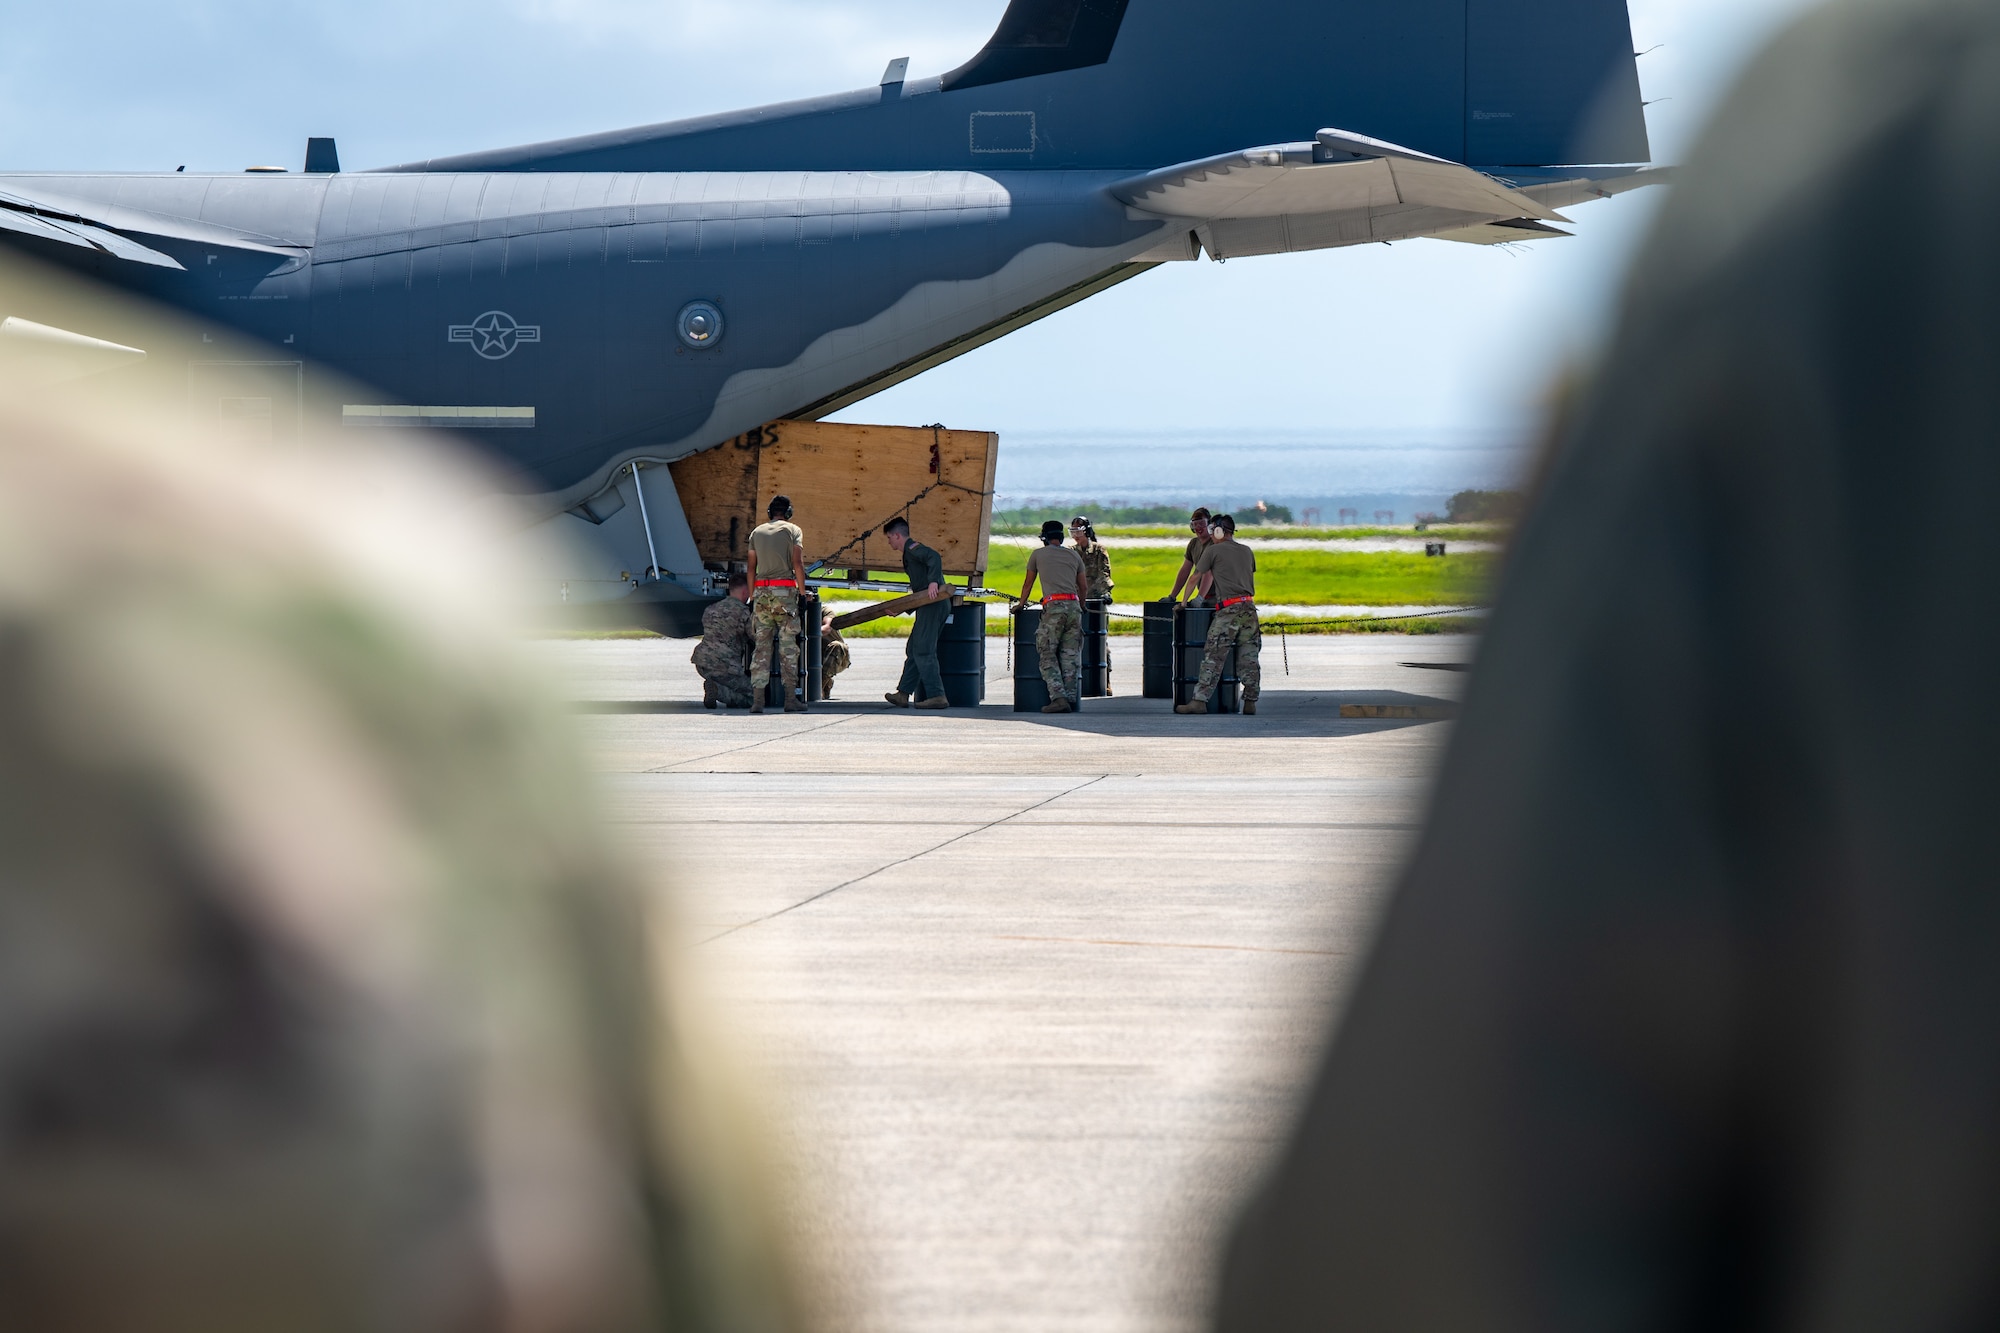 Maintainers unload an aircraft.